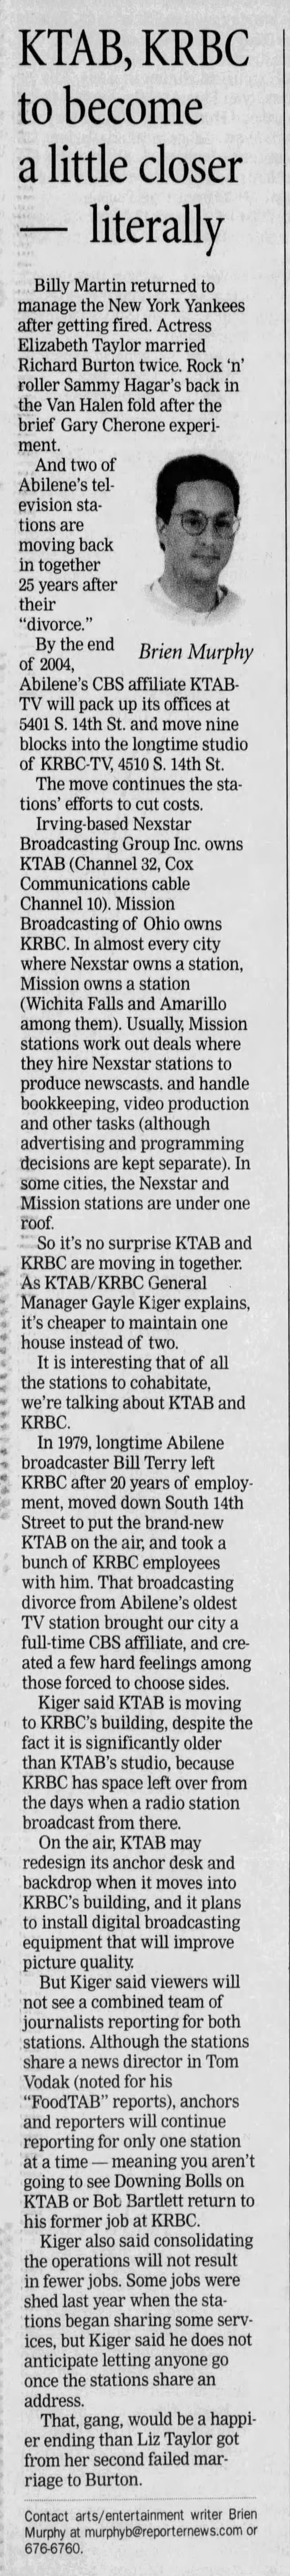 KTAB, KRBC to become a little closer—literally